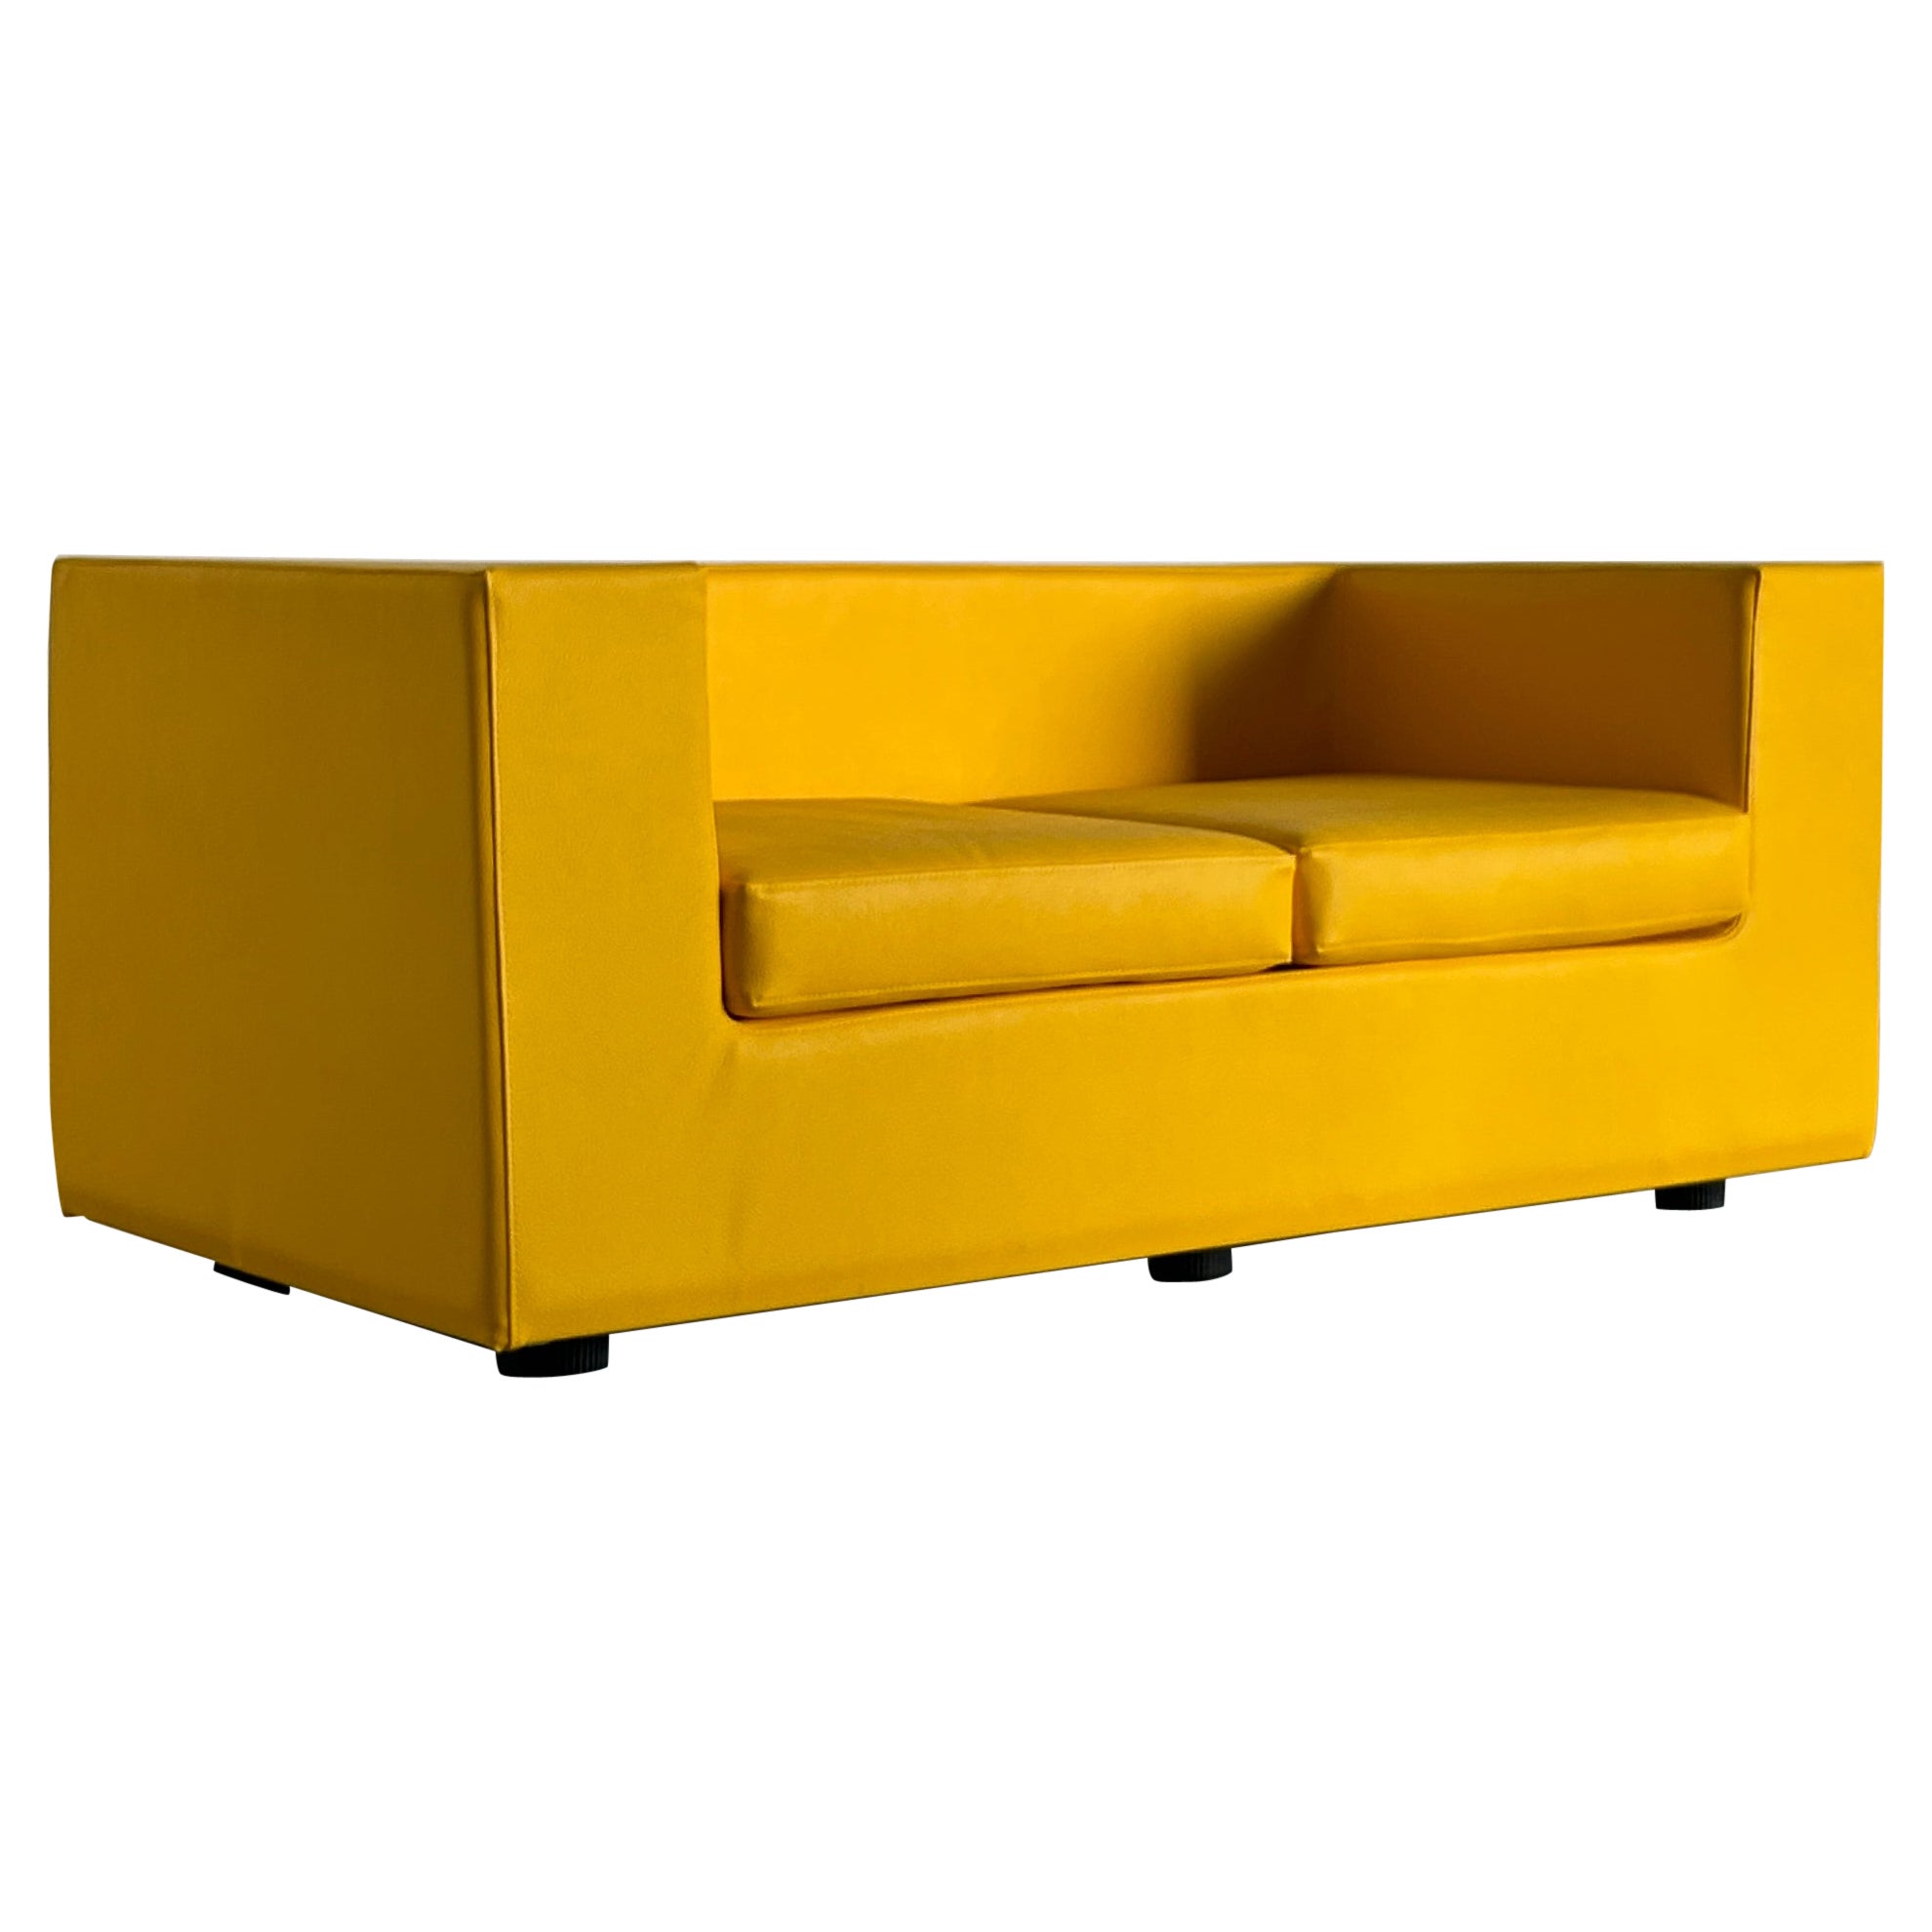 1960s Yellow "Throw-Away" Sofa, Willie Landels for Zanotta, Reupholstered, 1968 For Sale